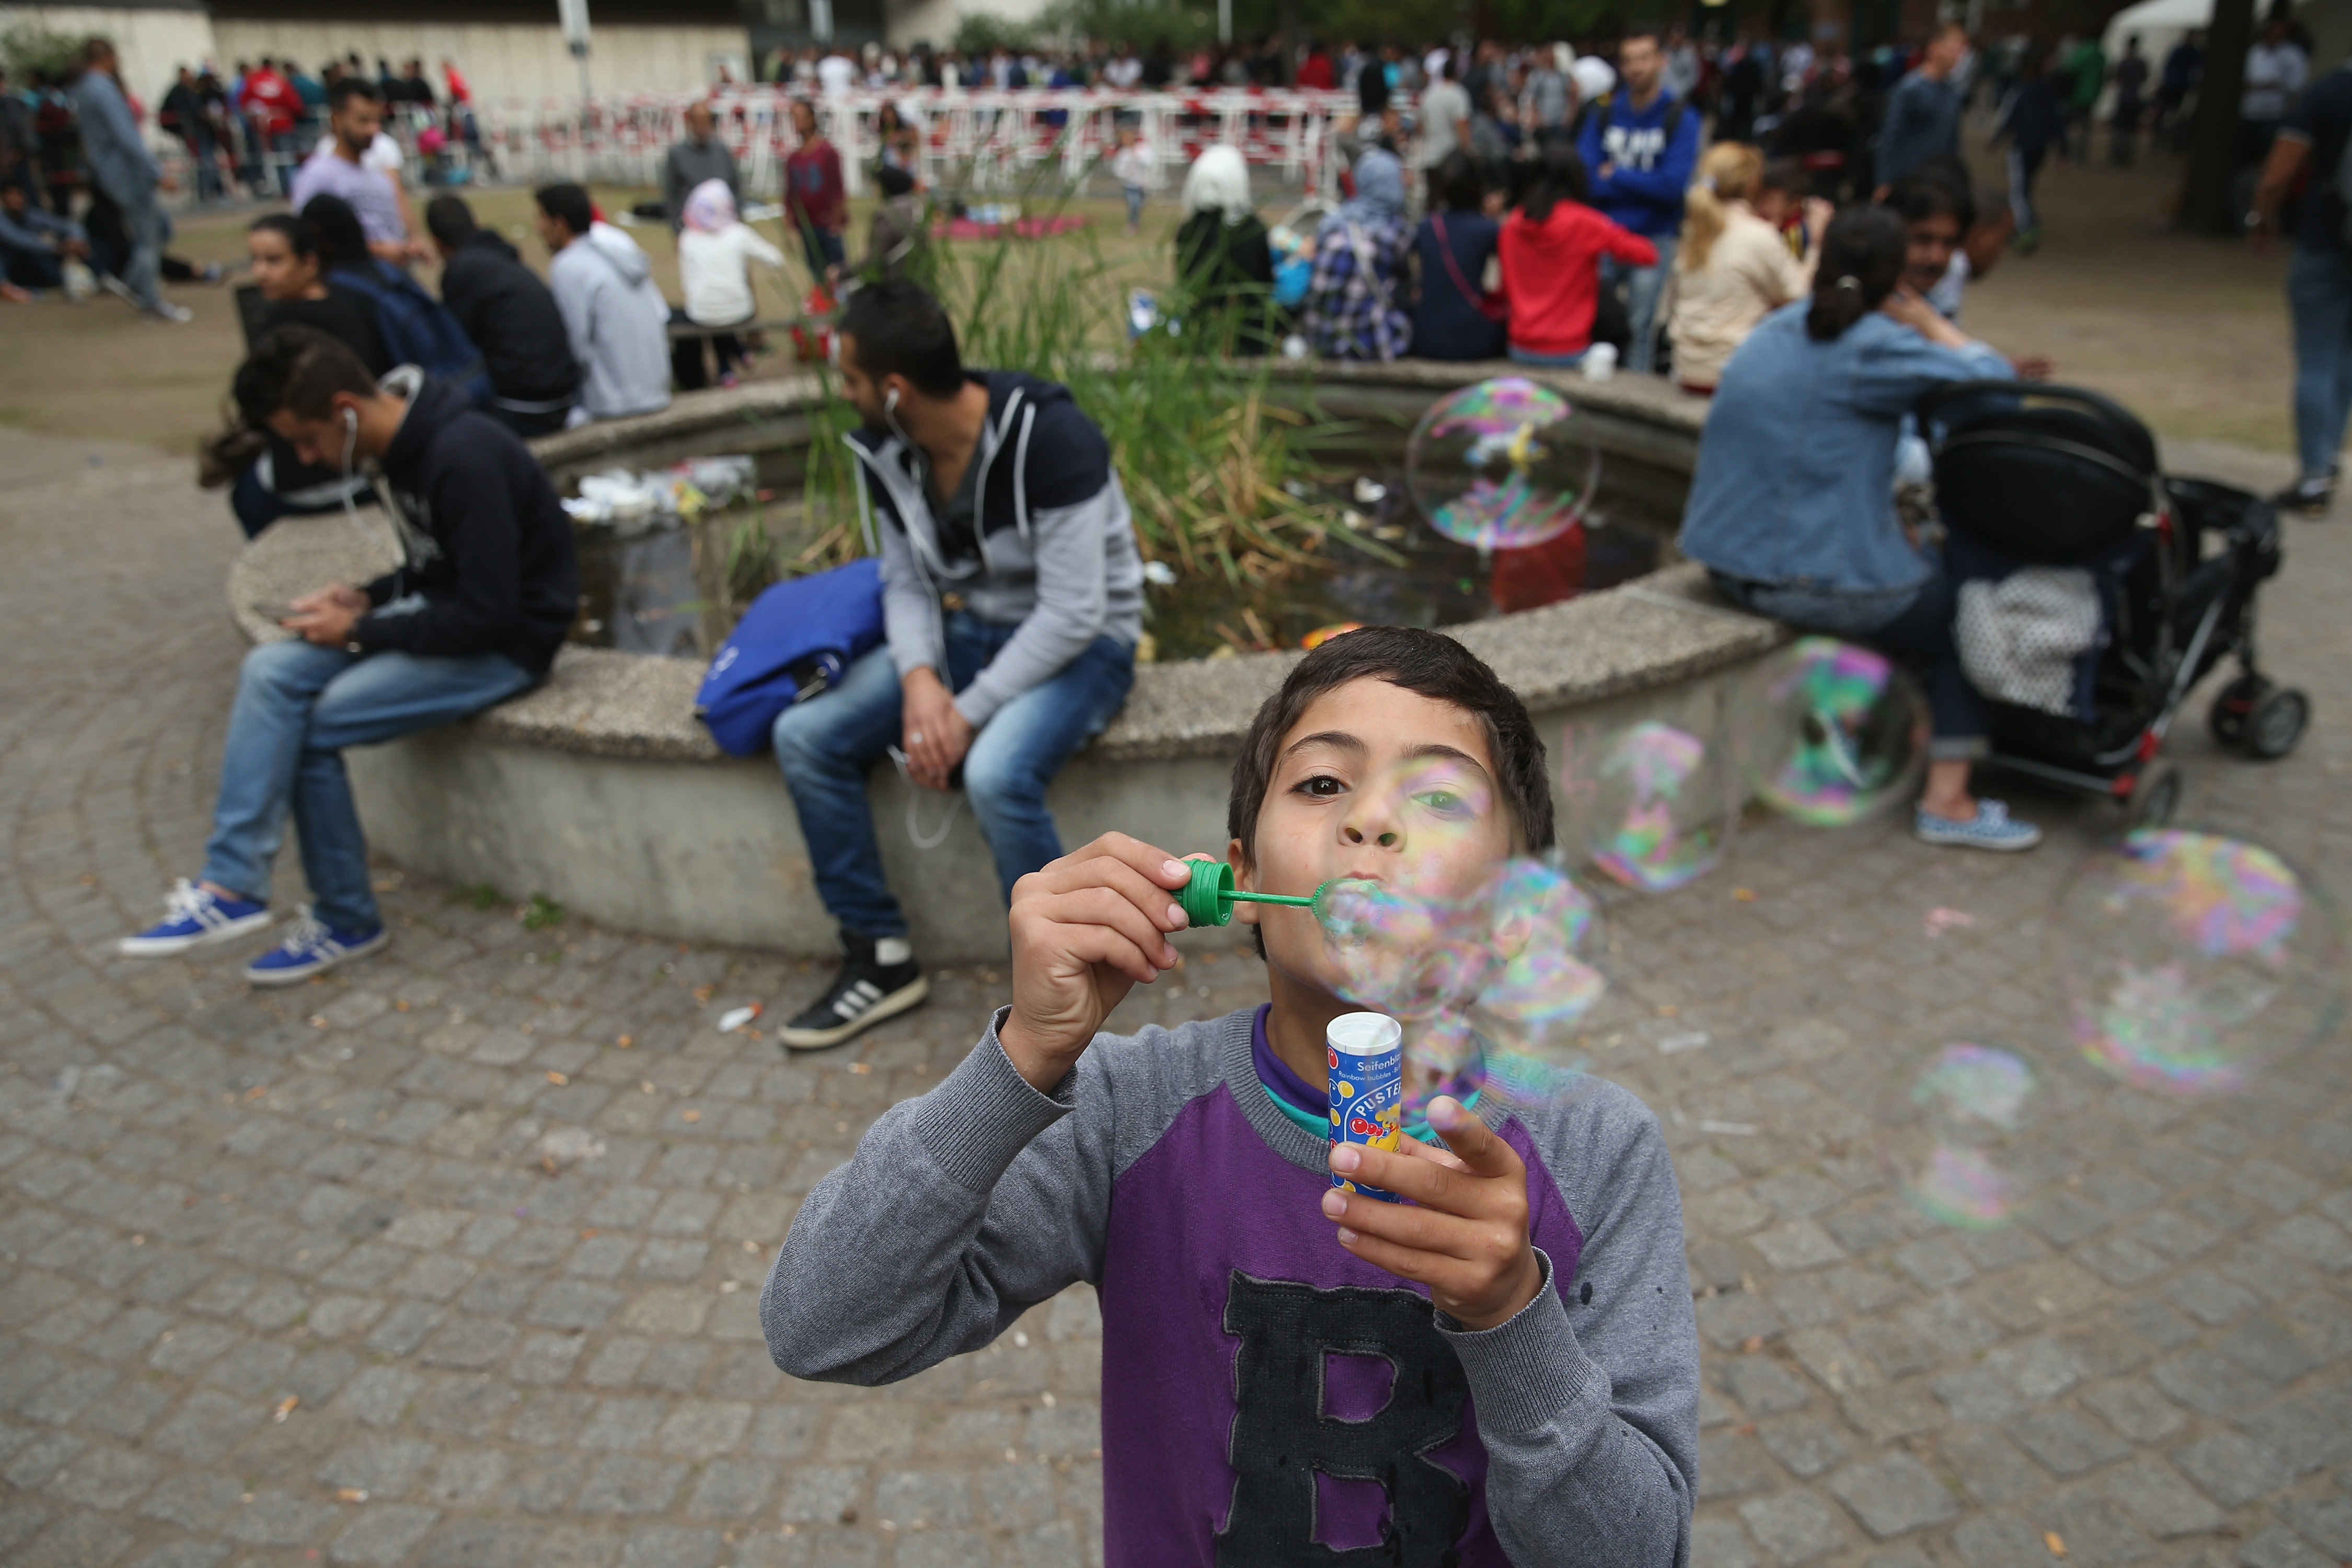 A young migrant boy from Syria blows soap bubbles as other migrants seeking asylum in Germany wait to register at the Central Registration Office for Asylum Seekers in Berlin on Aug. 27, 2015. (Sean Gallup—Getty Images)